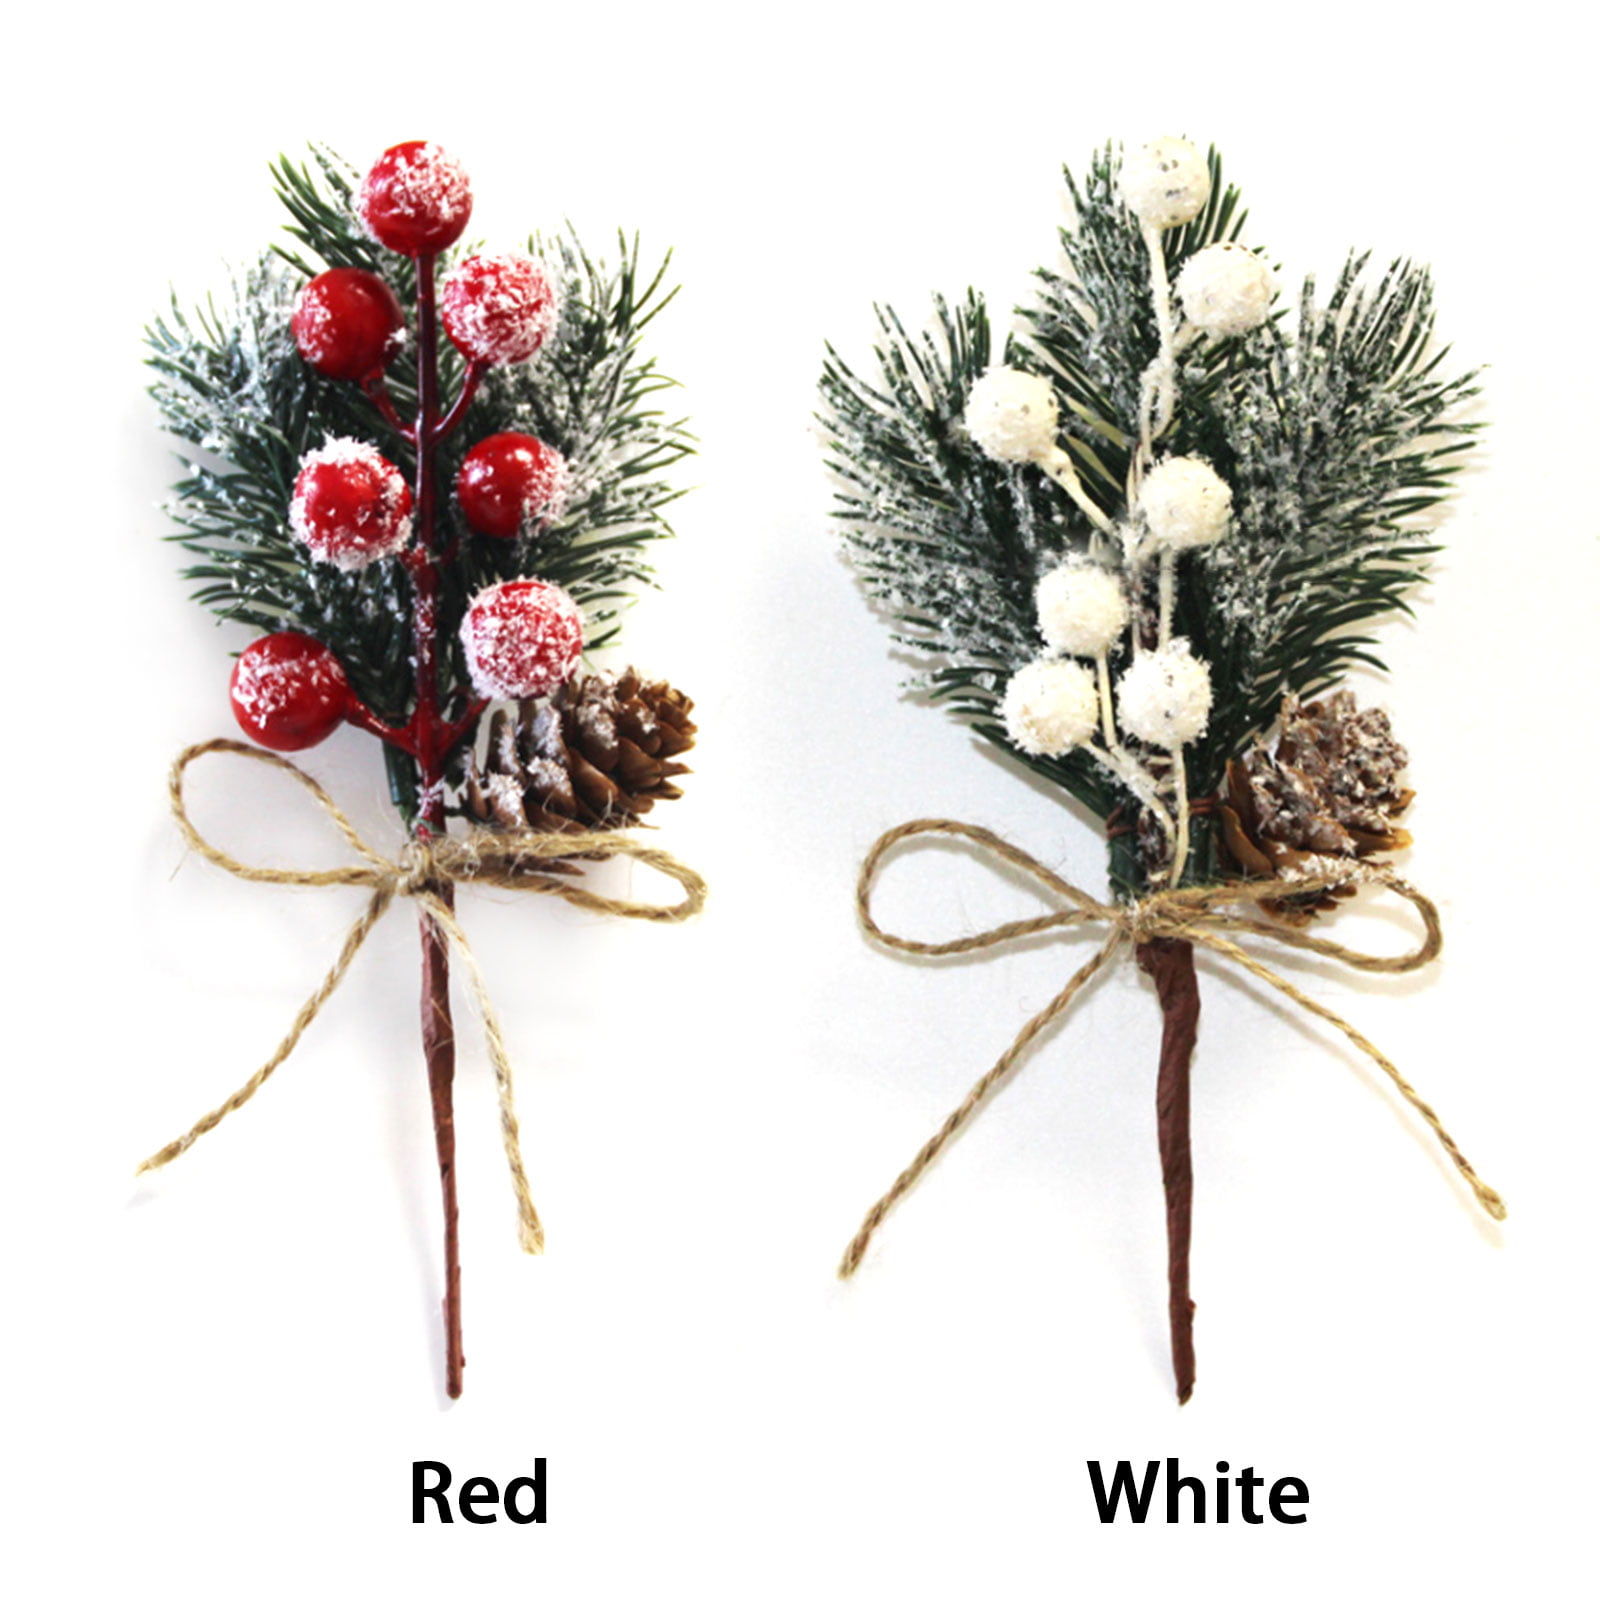  Ceenna 100 Pcs Artificial Christmas Picks and Sprays Christmas  Berries for Trees Christmas Evergreen Pine Cones Branches Stems Winter  Floral Picks for Decoration Craft (White) : Arts, Crafts & Sewing